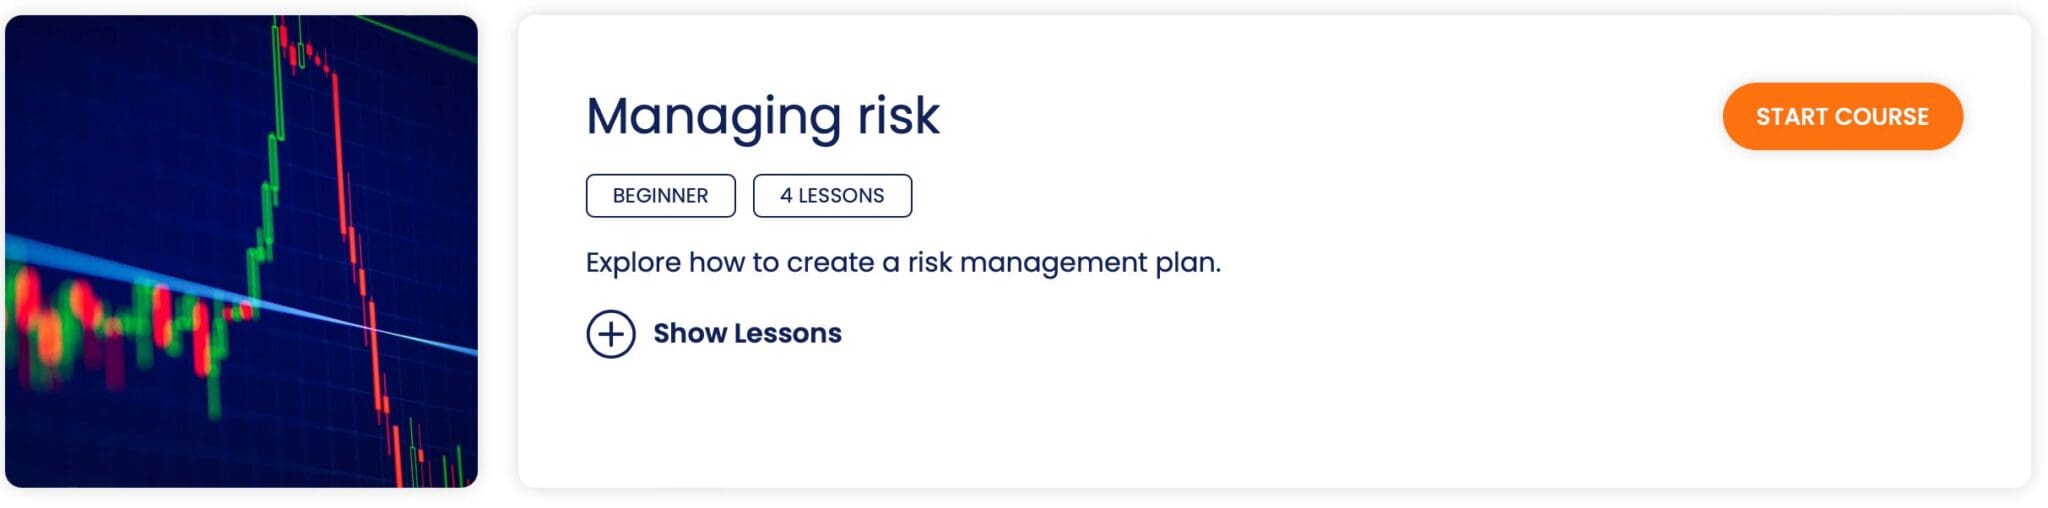 Course at FOREX.com on managing risk